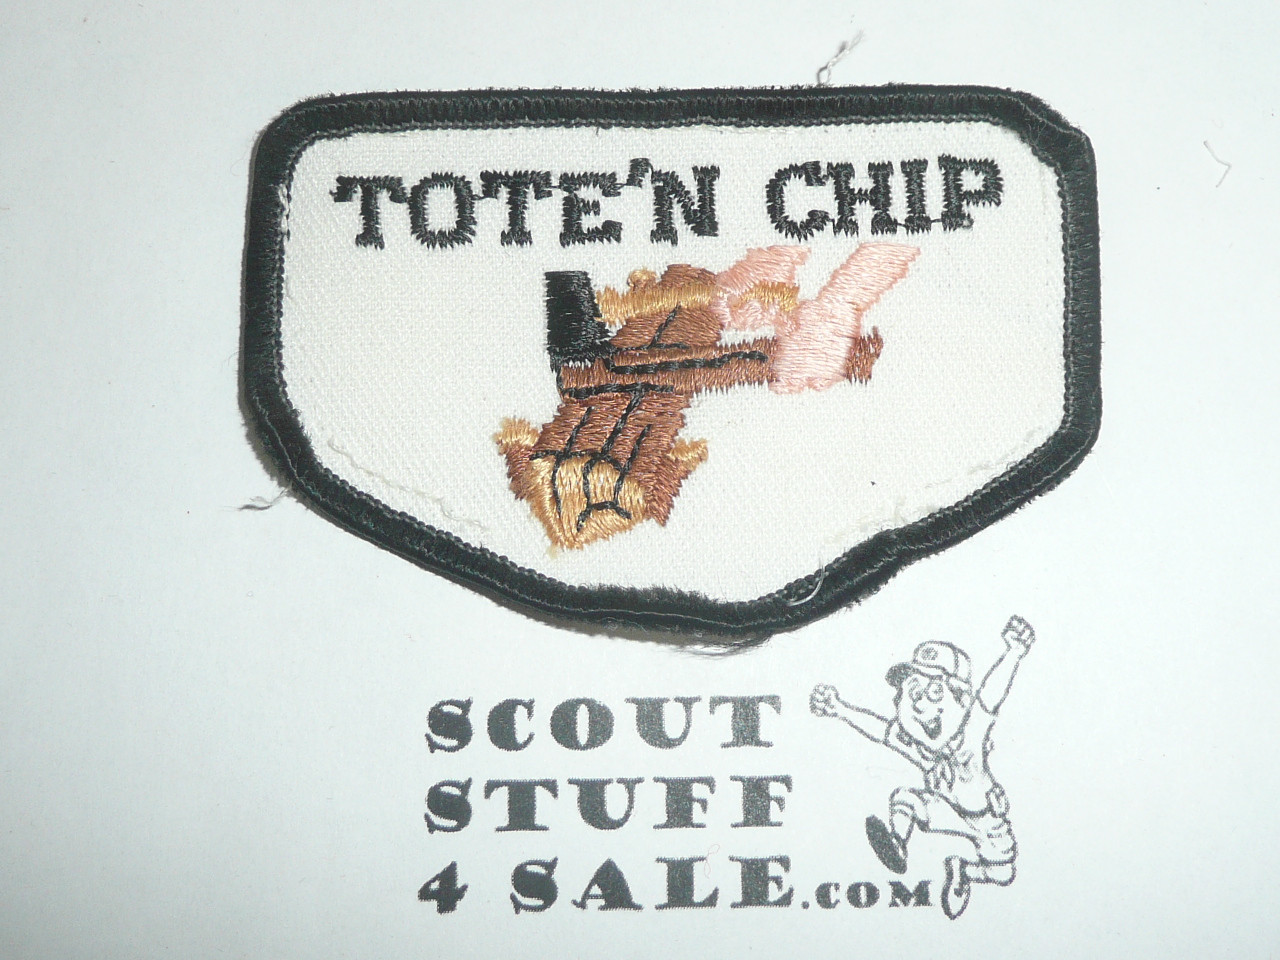 Tote'n Chip Boy Scout knife/Axe Award Patch, green bdr